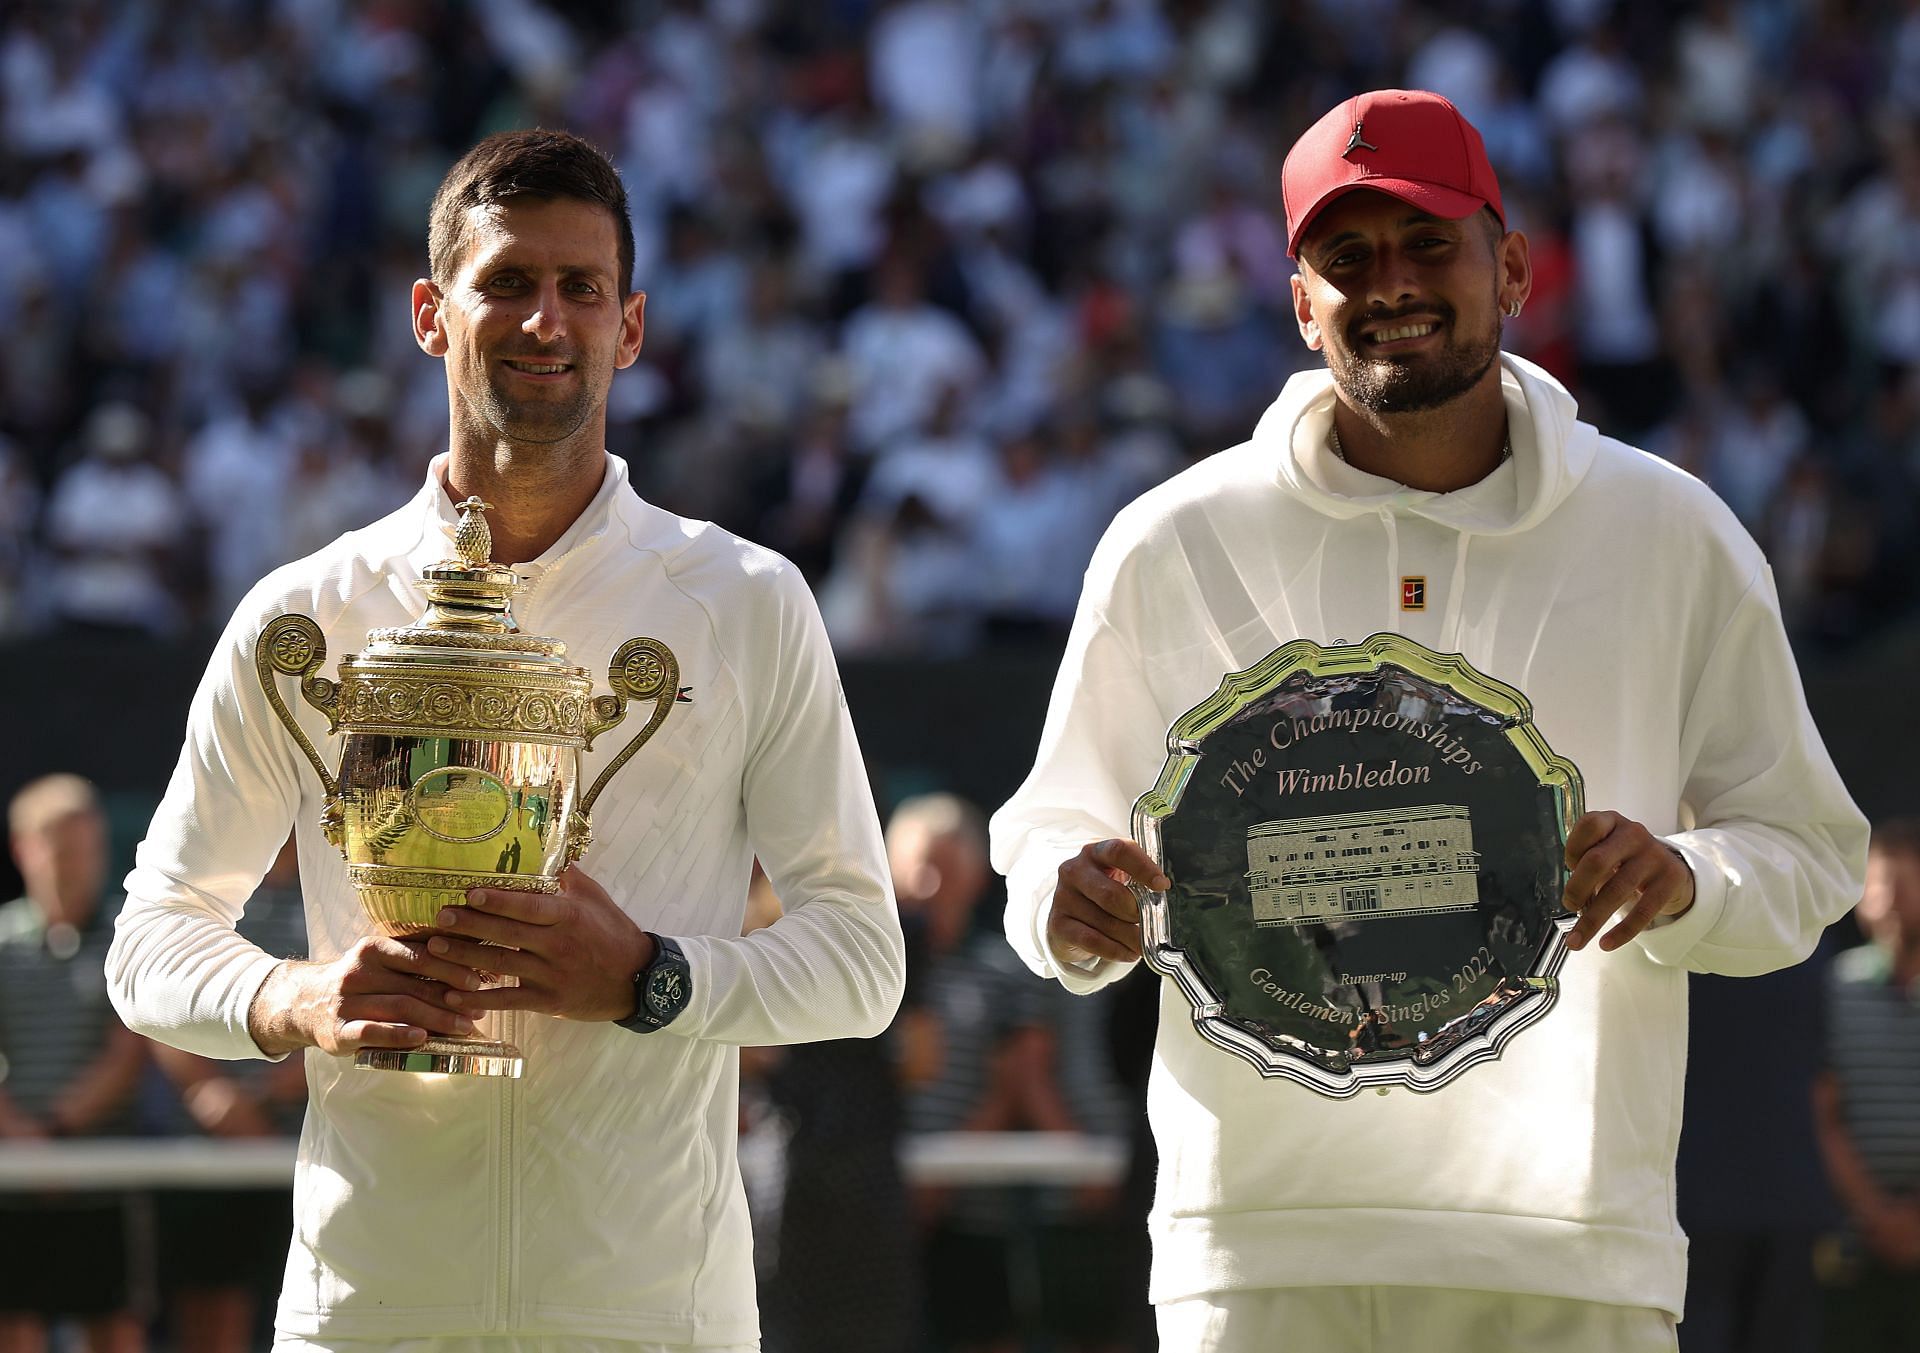 Novak Djokovic (L) and Nick Kyrgios (R) during the trophy presentation ceremony at the 2022 Wimbledon Championships